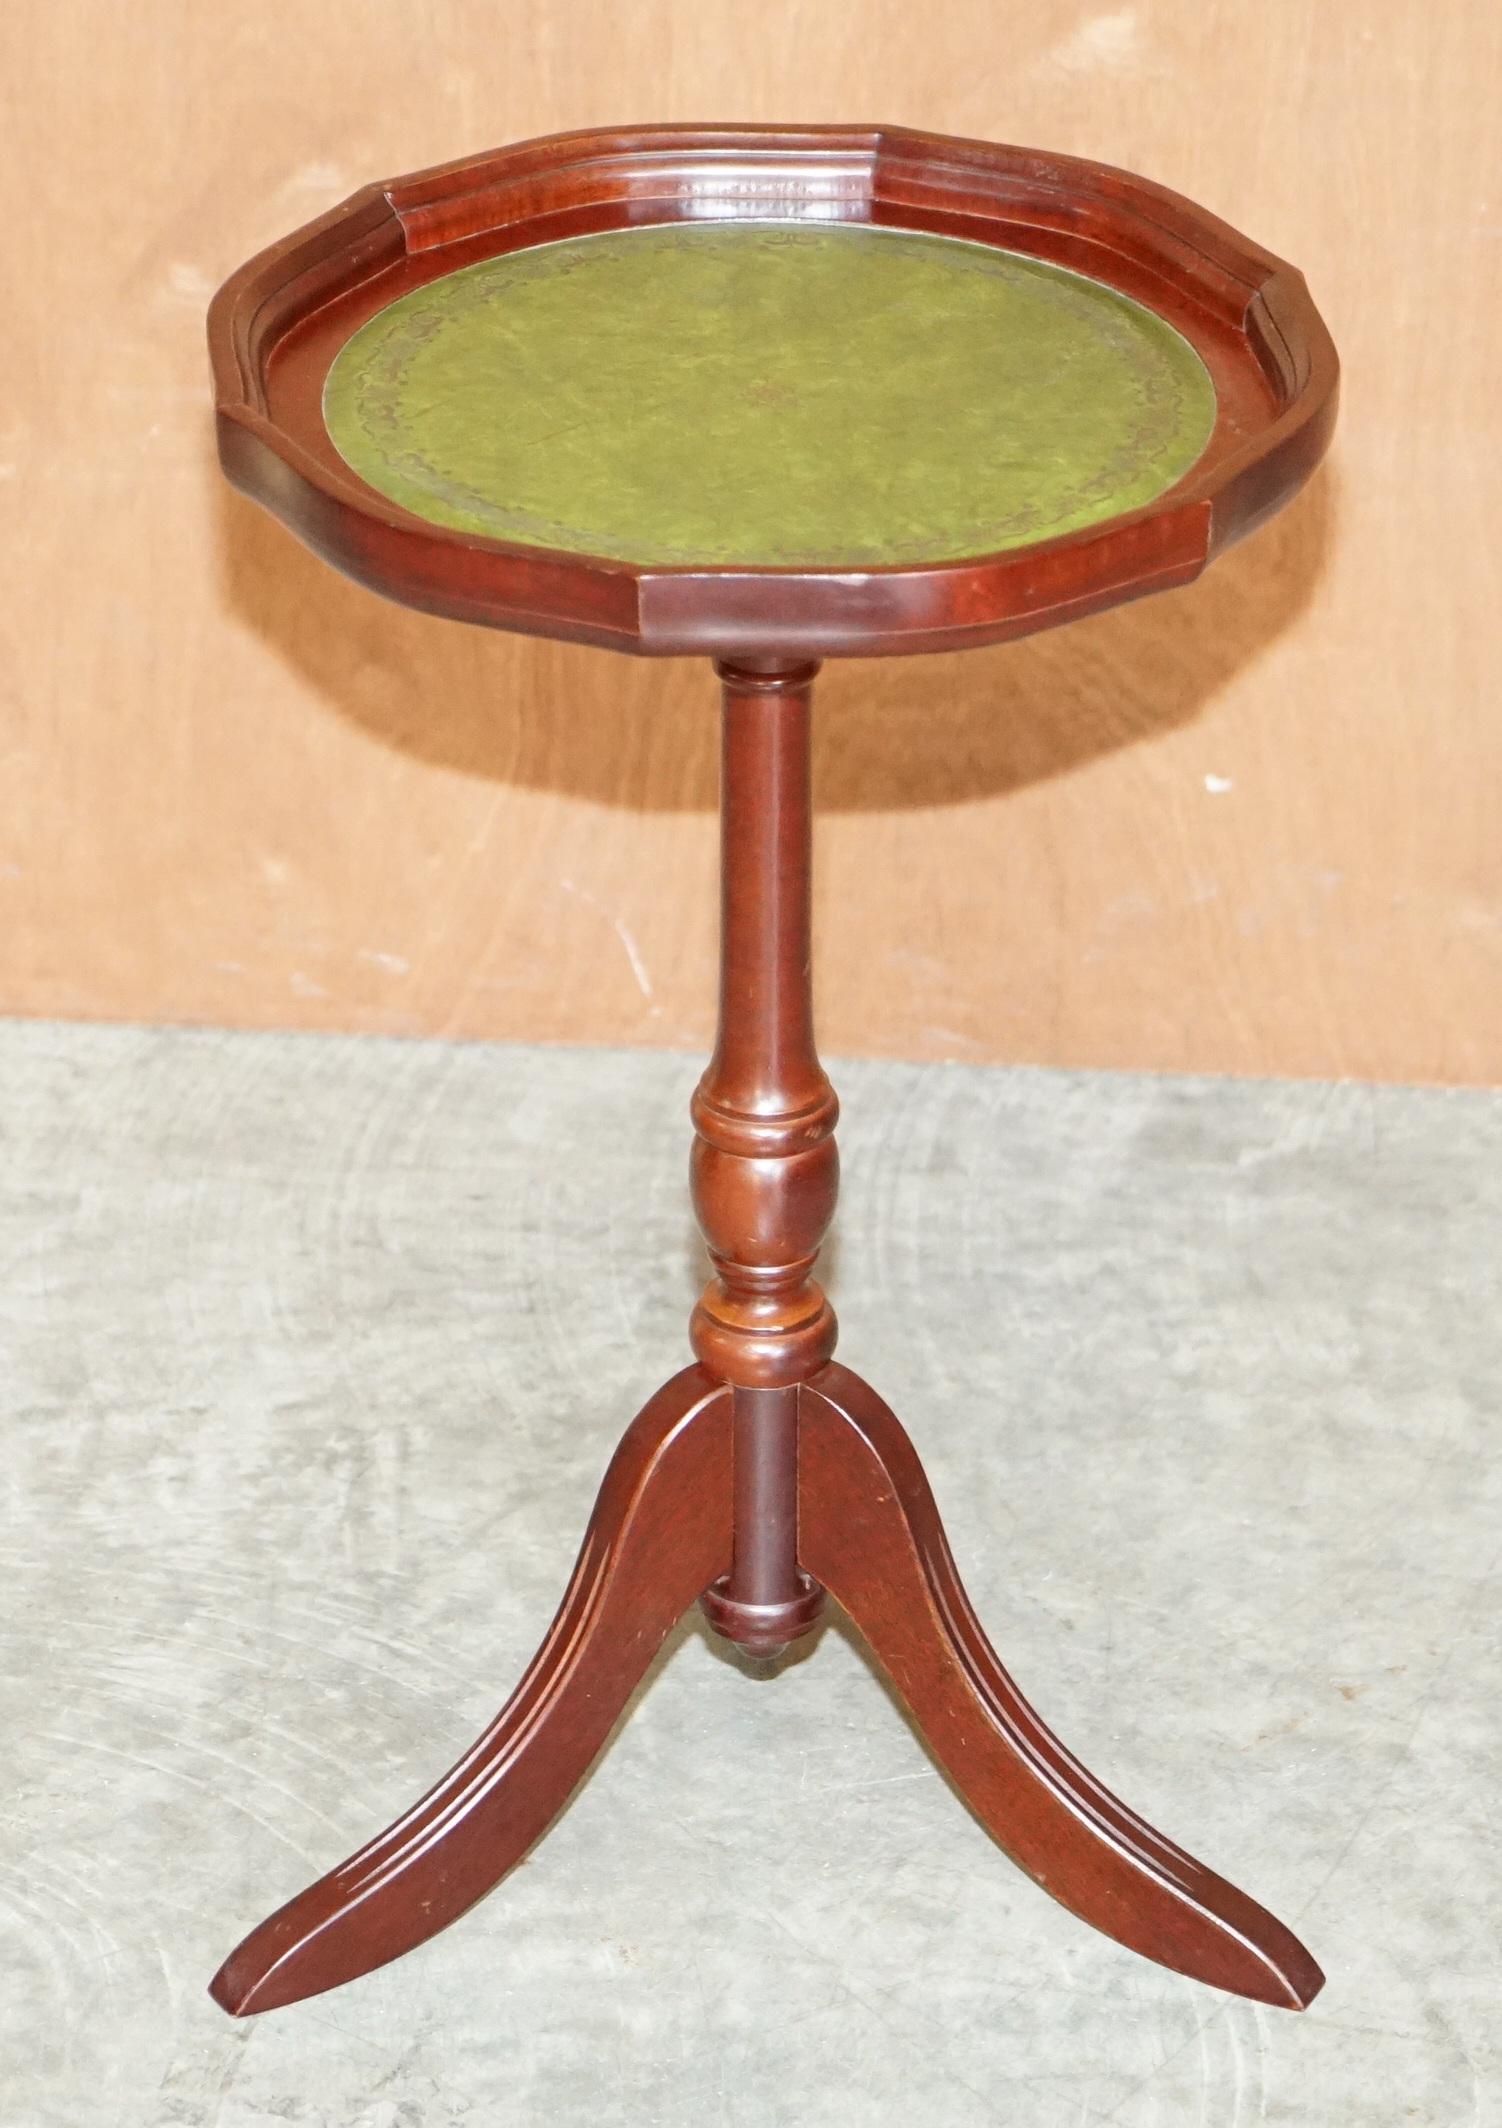 We are delighted to offer for sale this very nice vintage Bevan Funnell mahogany & green leather topped tripod table

A good looking and well made piece, ideally suited for a lamp or glass of wine with a picture frame on it

It has been cleaned